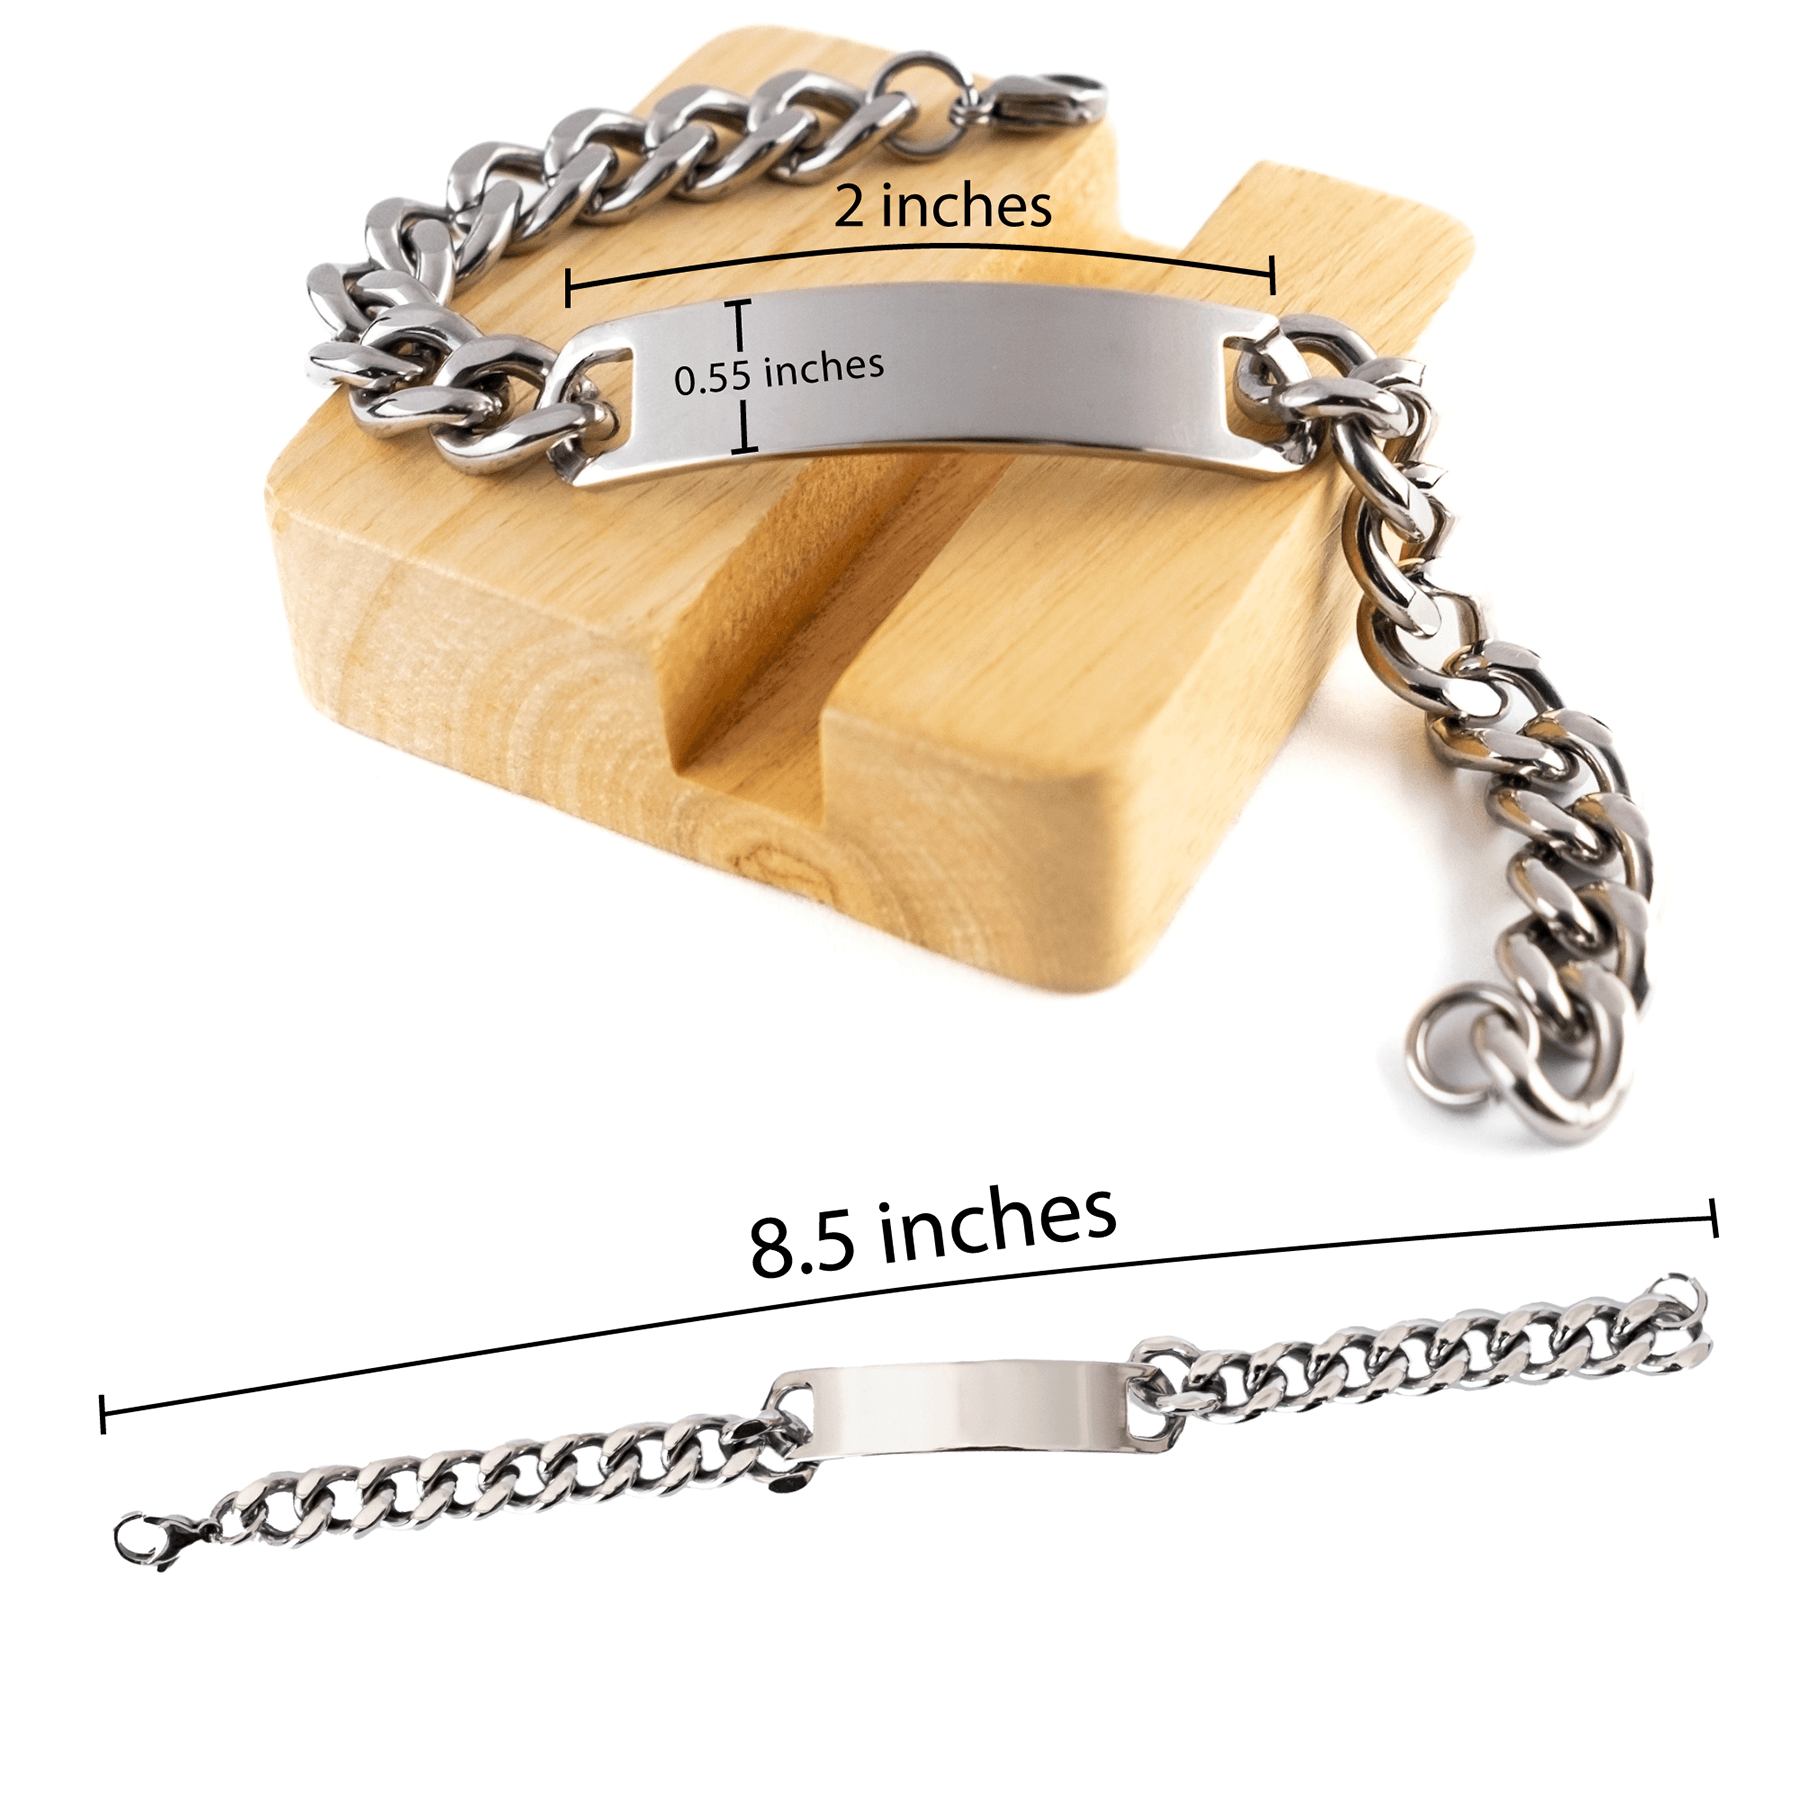 Naval Architect Cuban Chain Link Engraved Bracelet - Thanks for being who you are - Birthday Christmas Jewelry Gifts Coworkers Colleague Boss - Mallard Moon Gift Shop